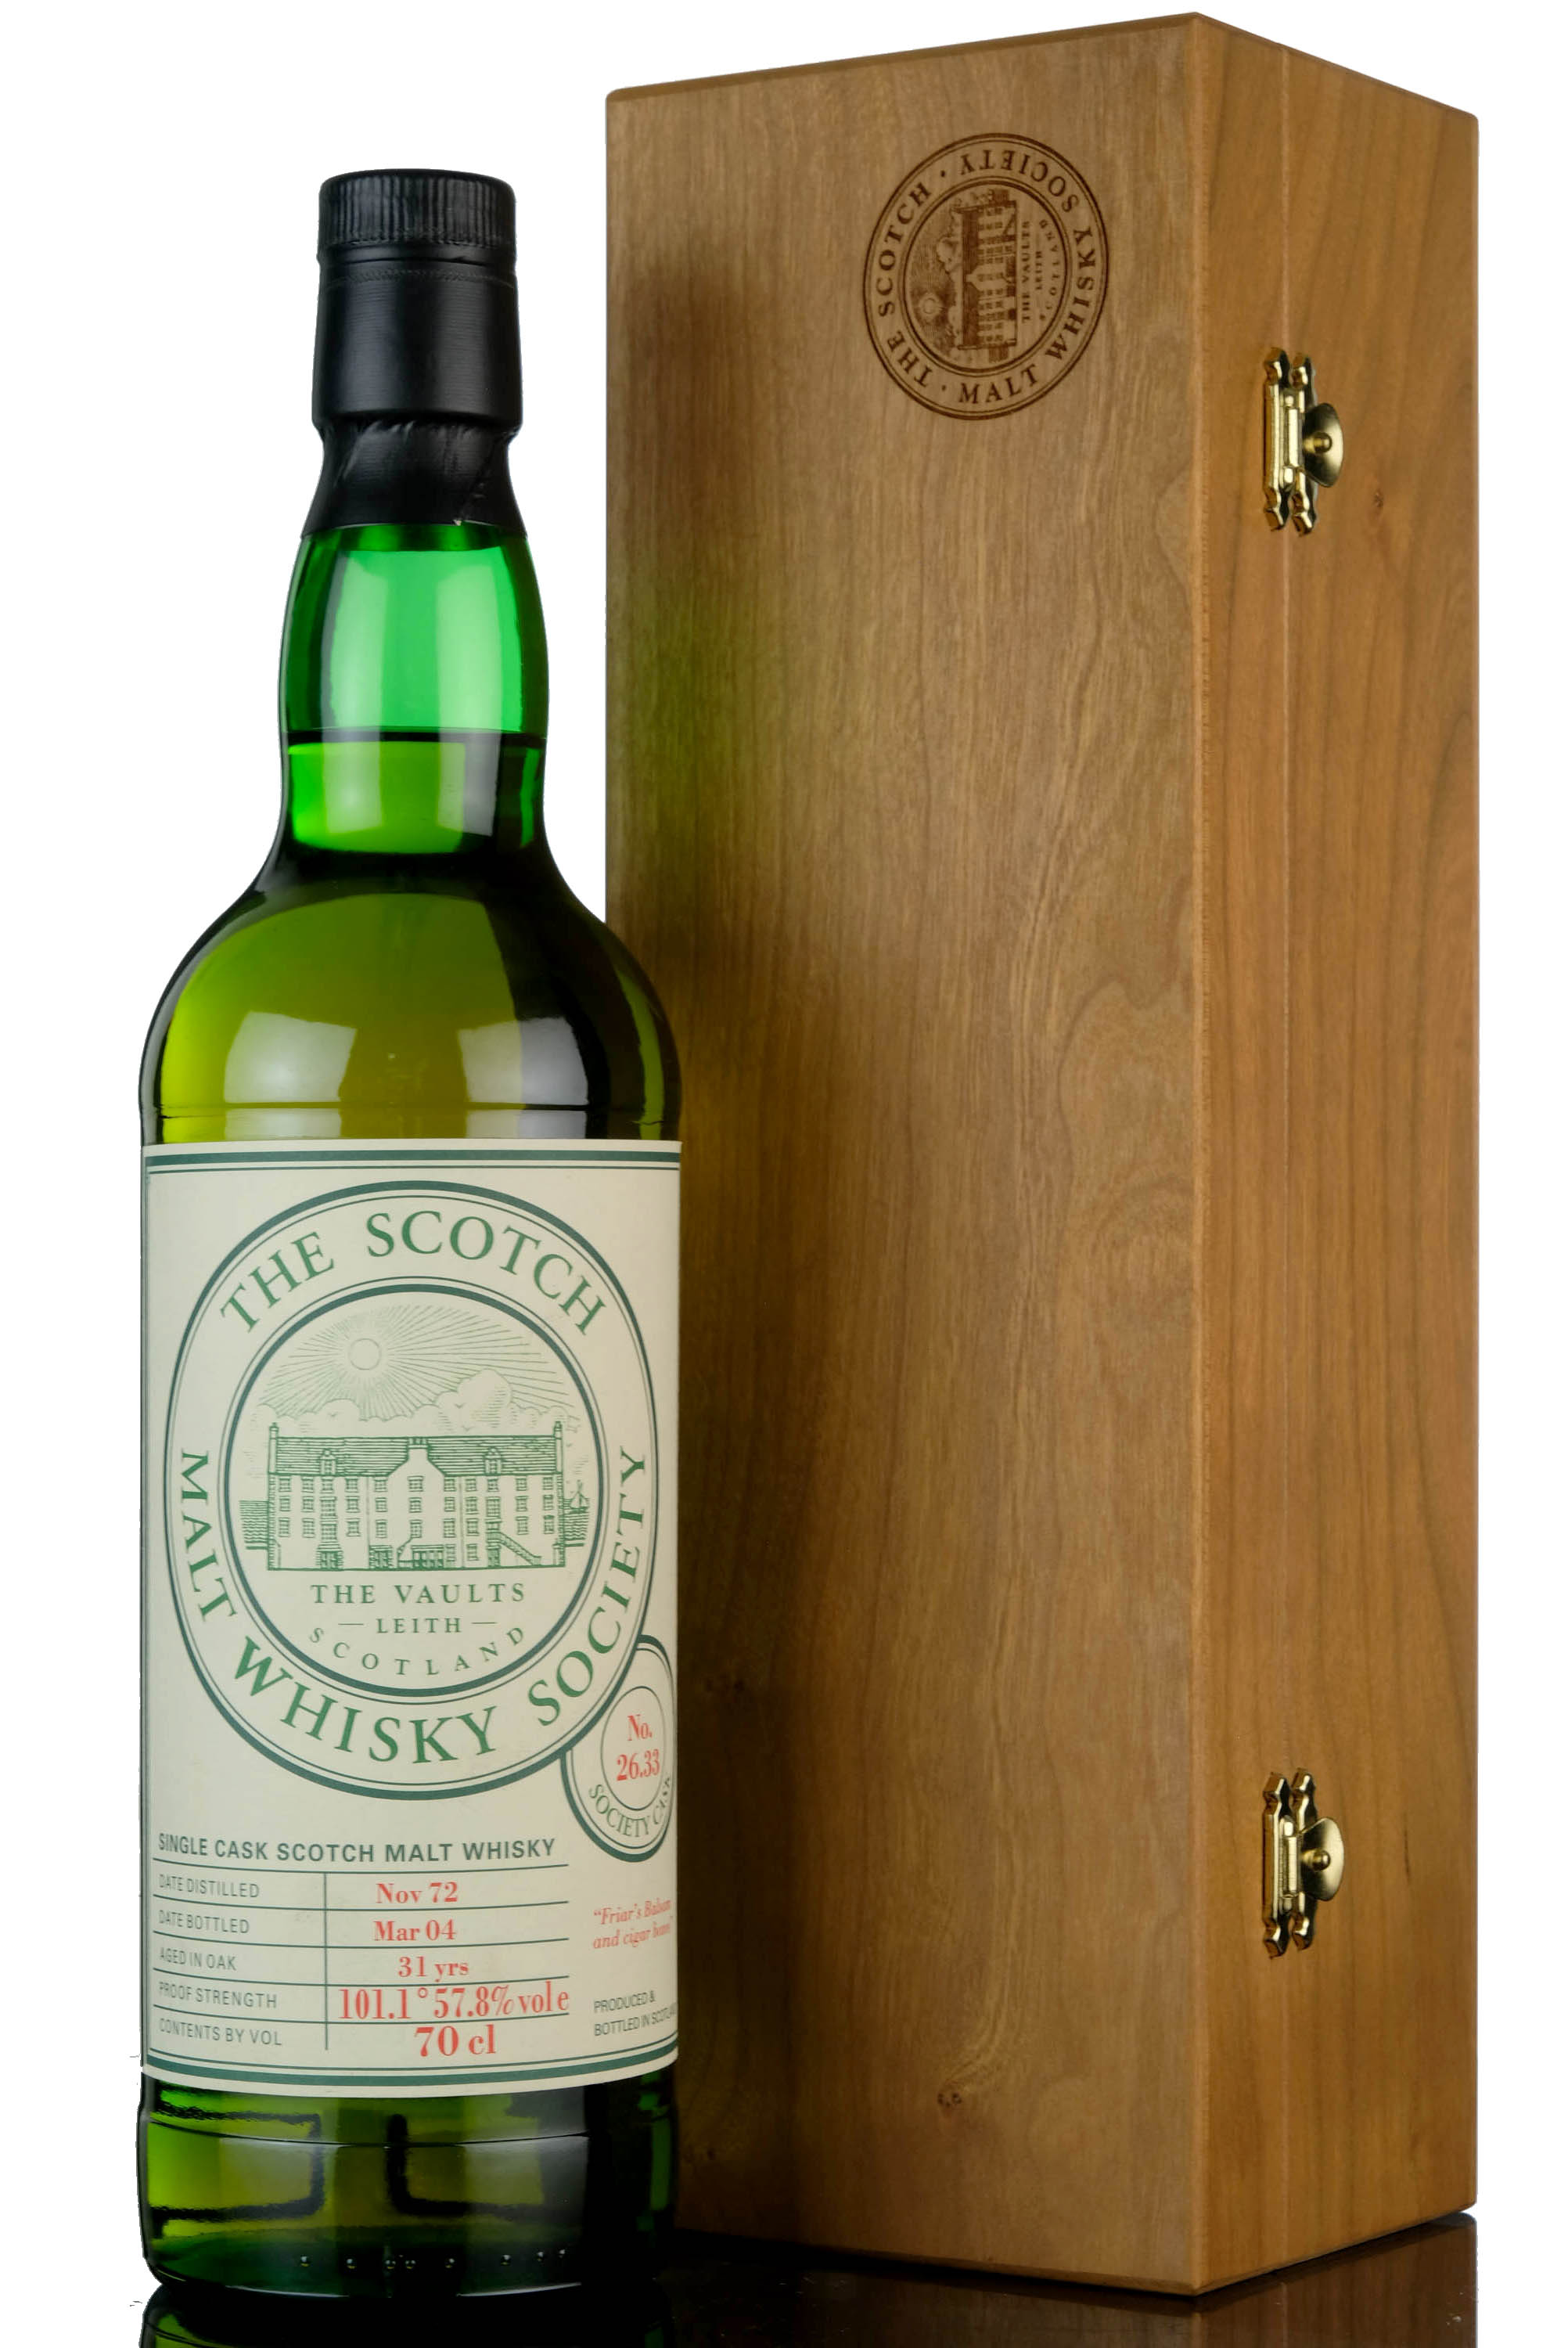 Clynelish 1972-2004 - 31 Year Old - SMWS 26.33